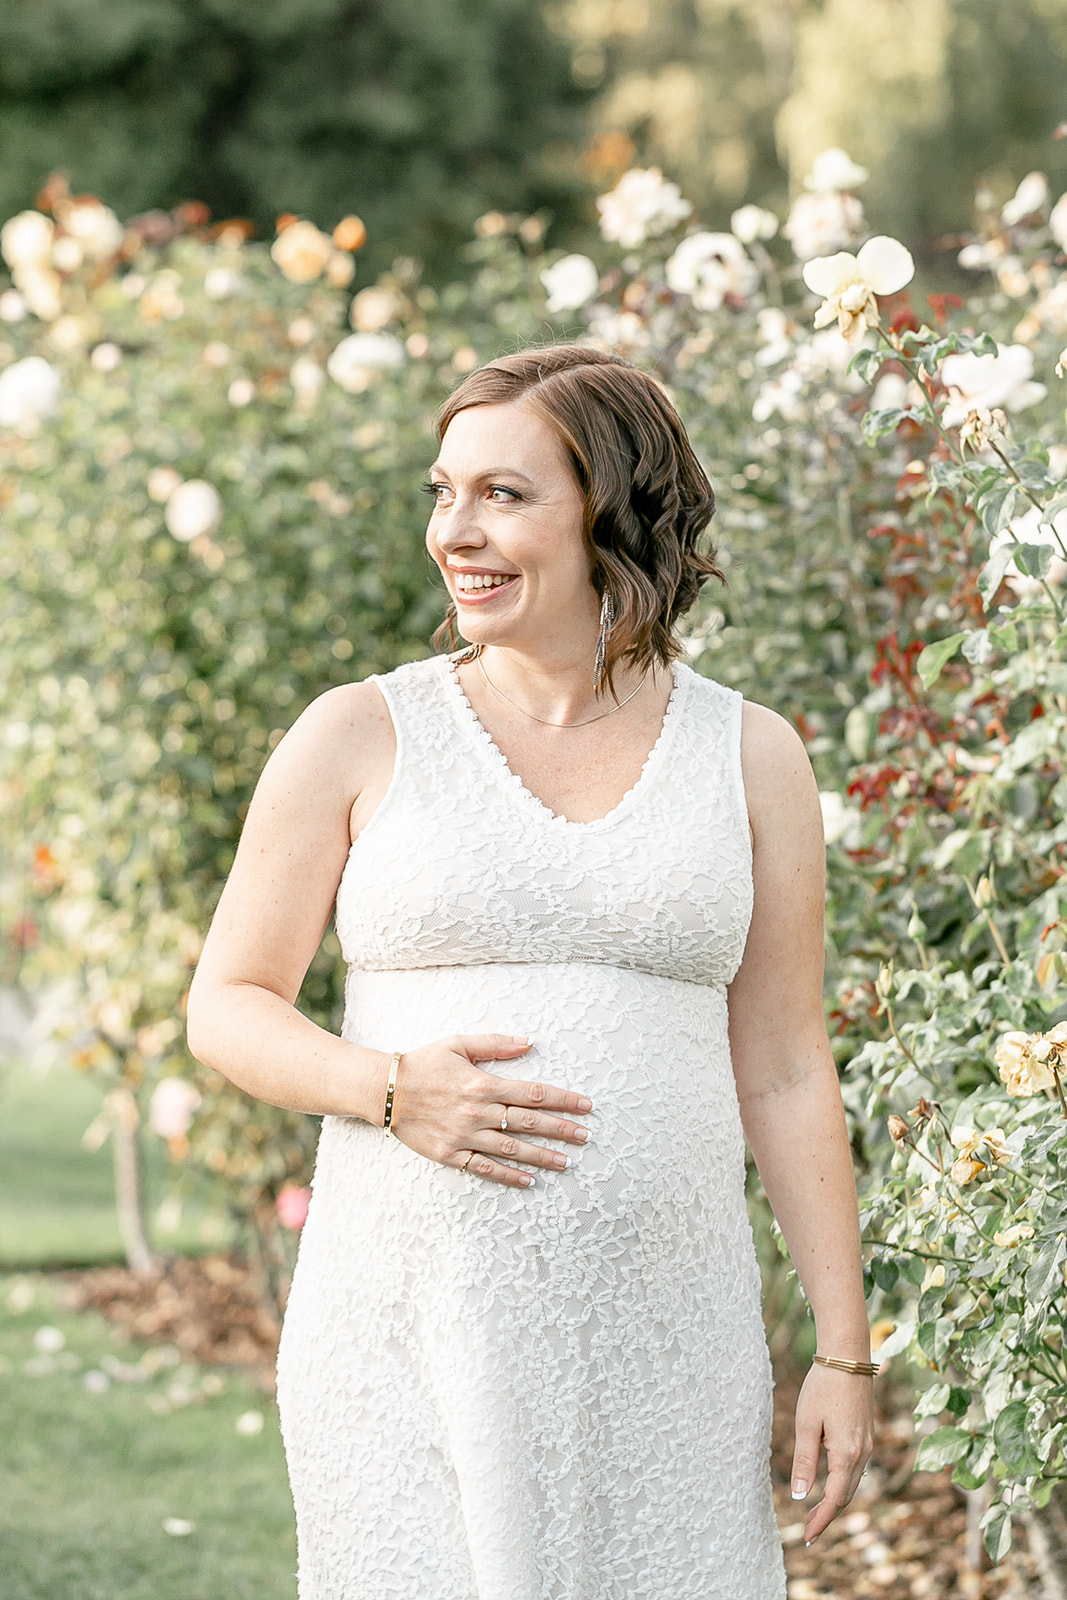 A mother to be in a white lace dress walks through a garden of white roses Portland Date Night Ideas